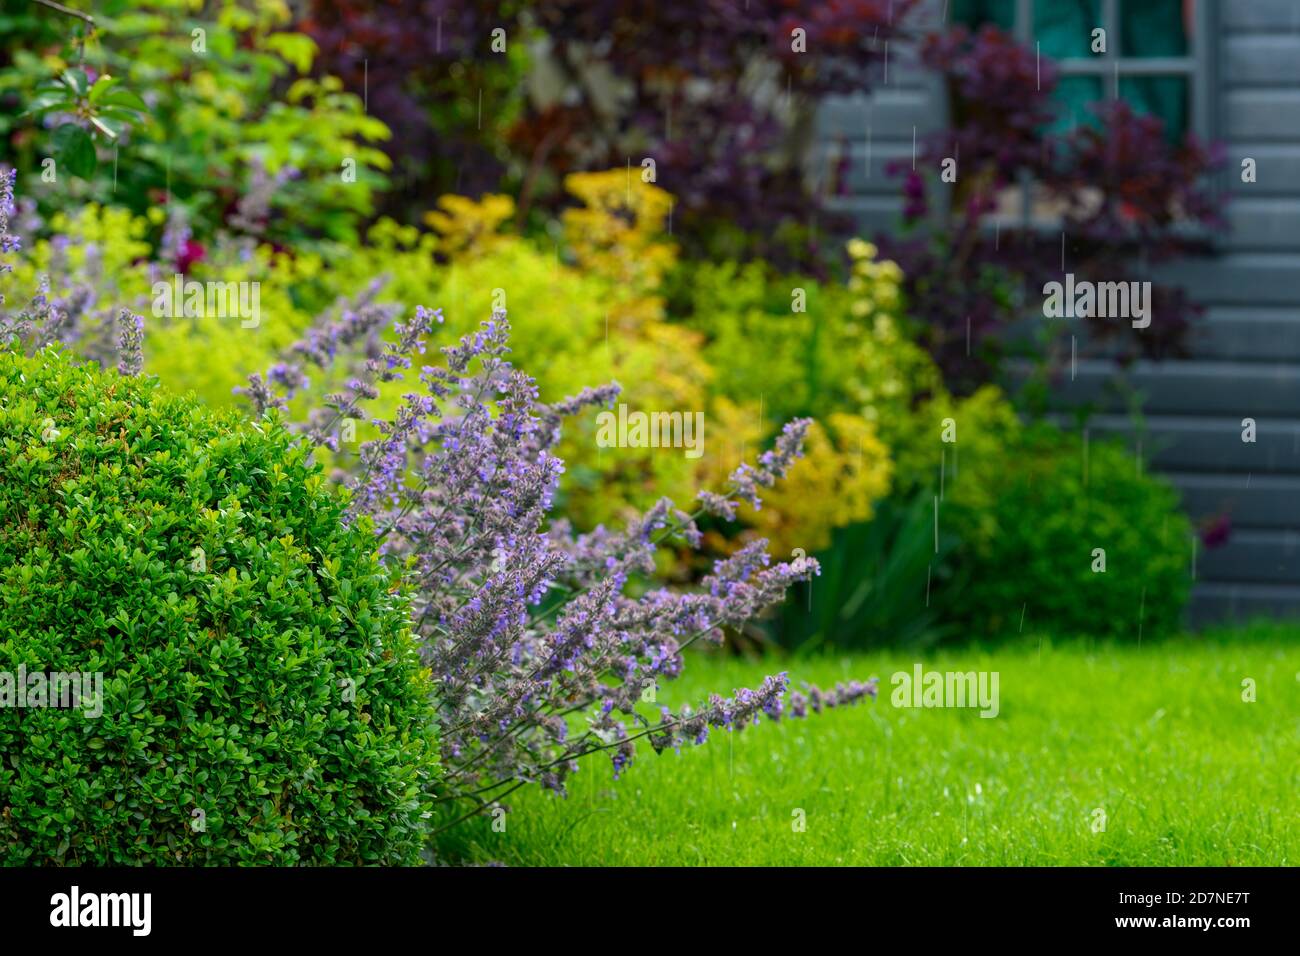 Landscaped private garden close-up (summer flowers, colourful foliage, mixed border plants, shrubs, box ball, lawn, raindrops) - Yorkshire England UK Stock Photo